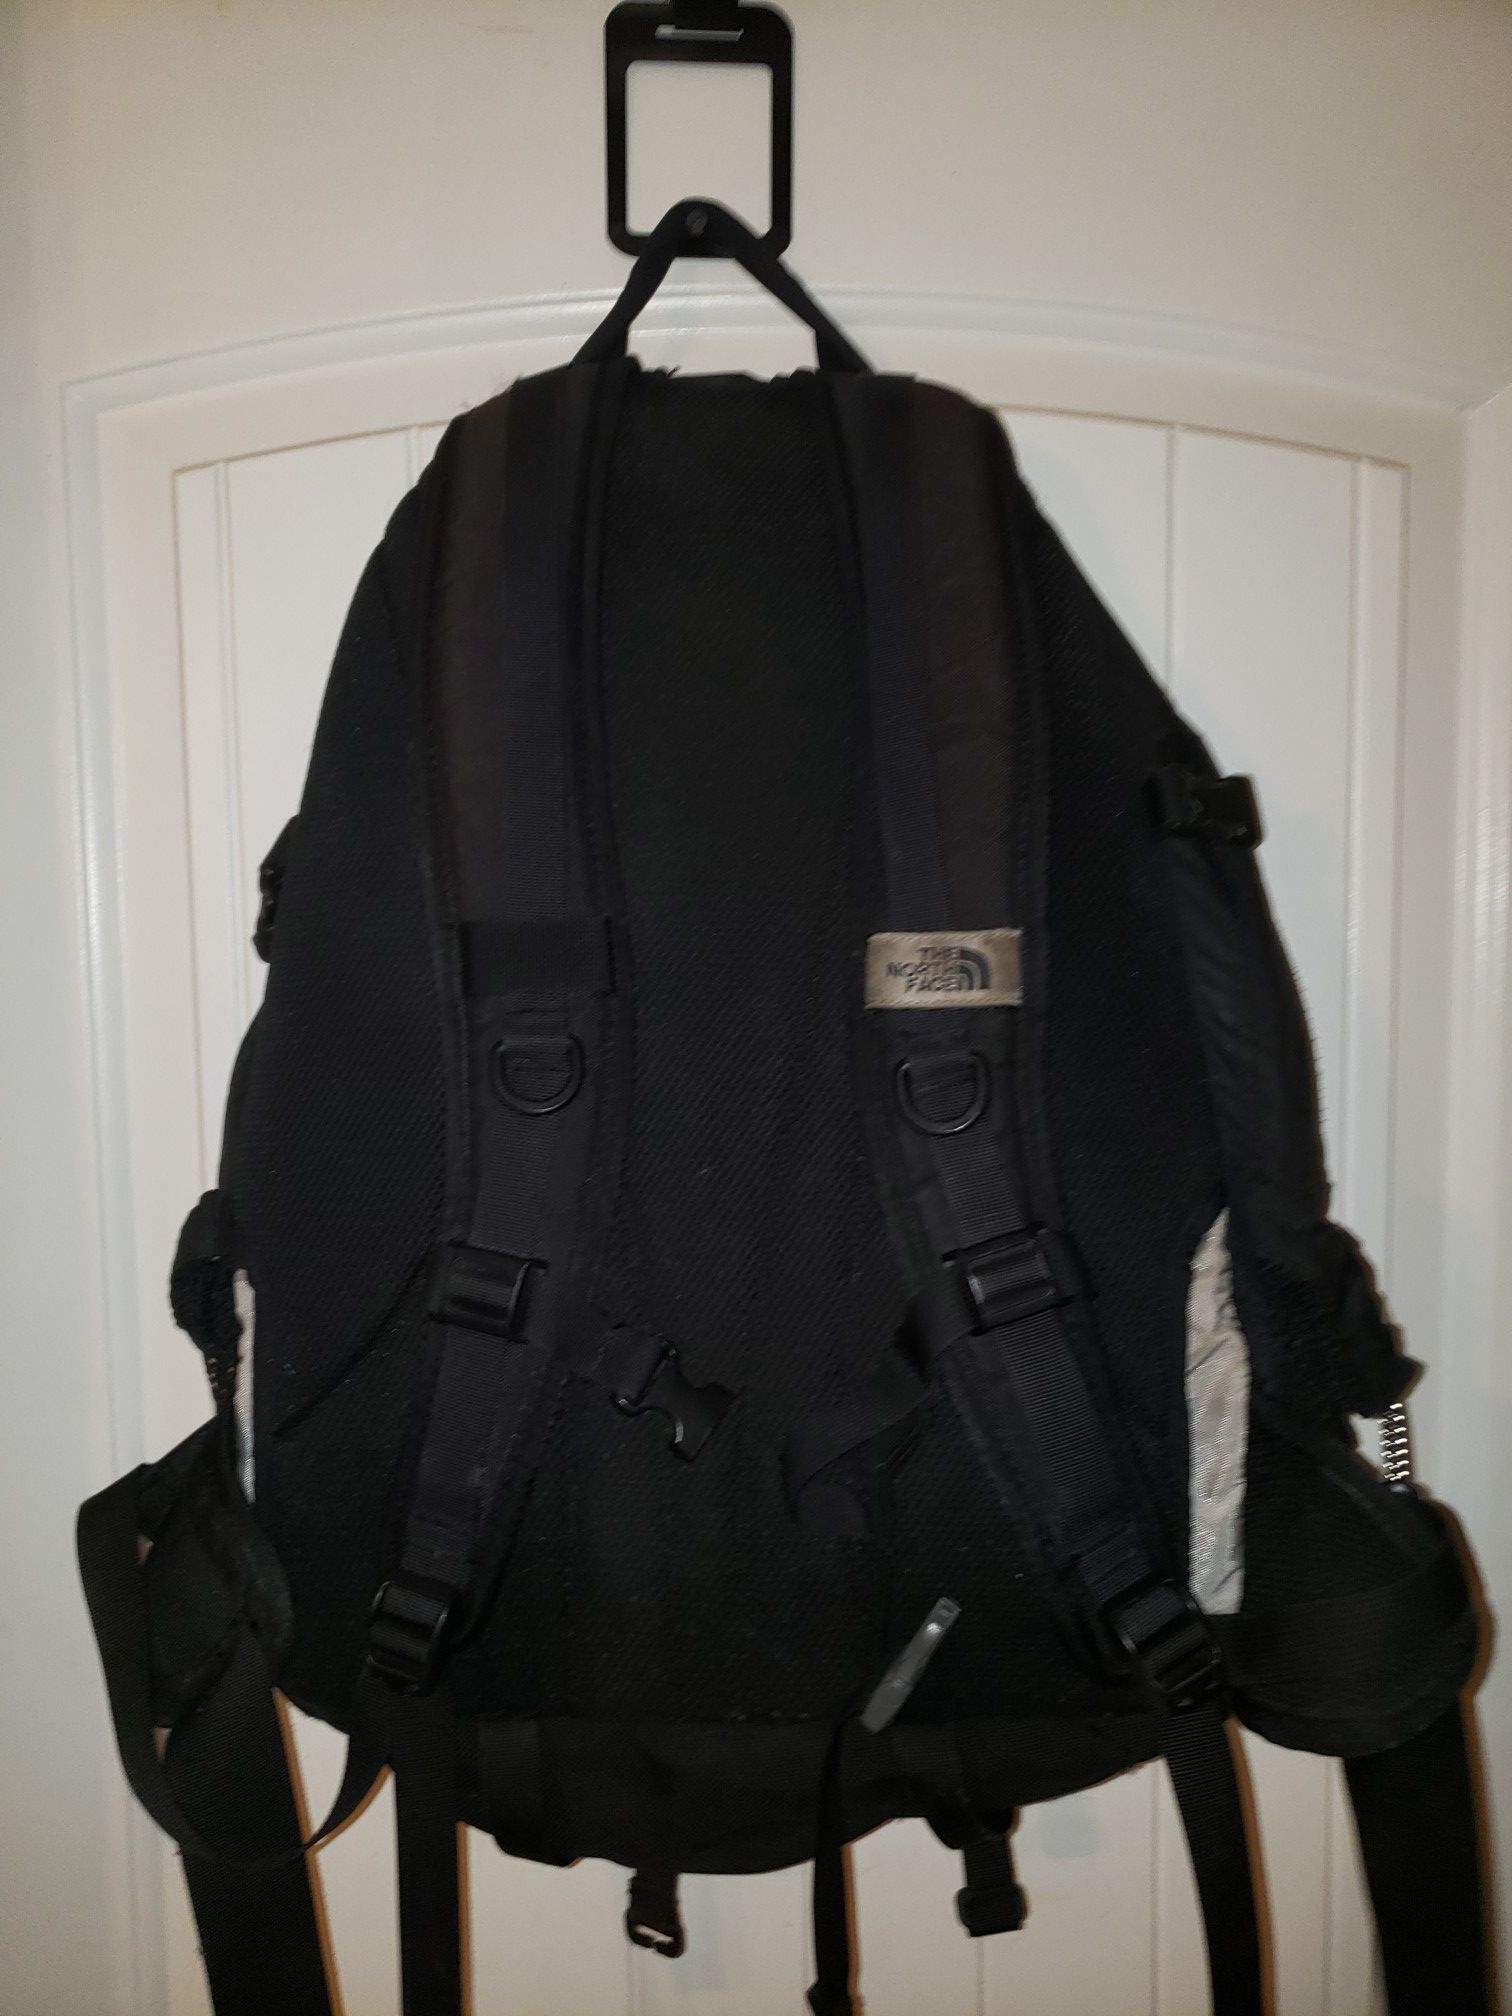 Northface backpack